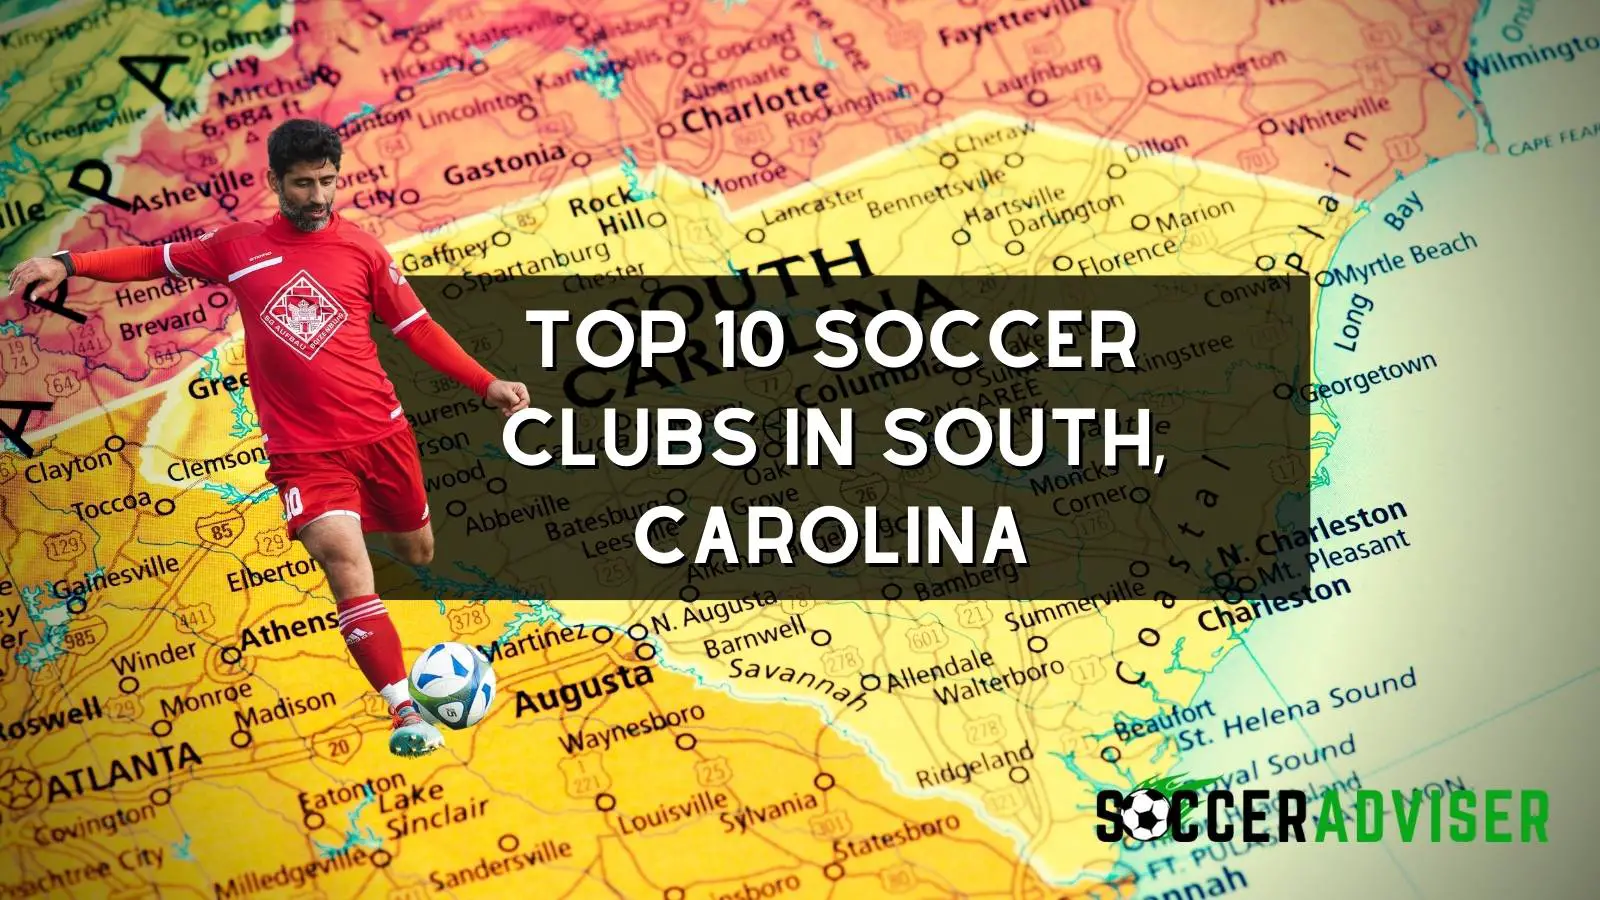 Top 10 Soccer Clubs in South, Carolina